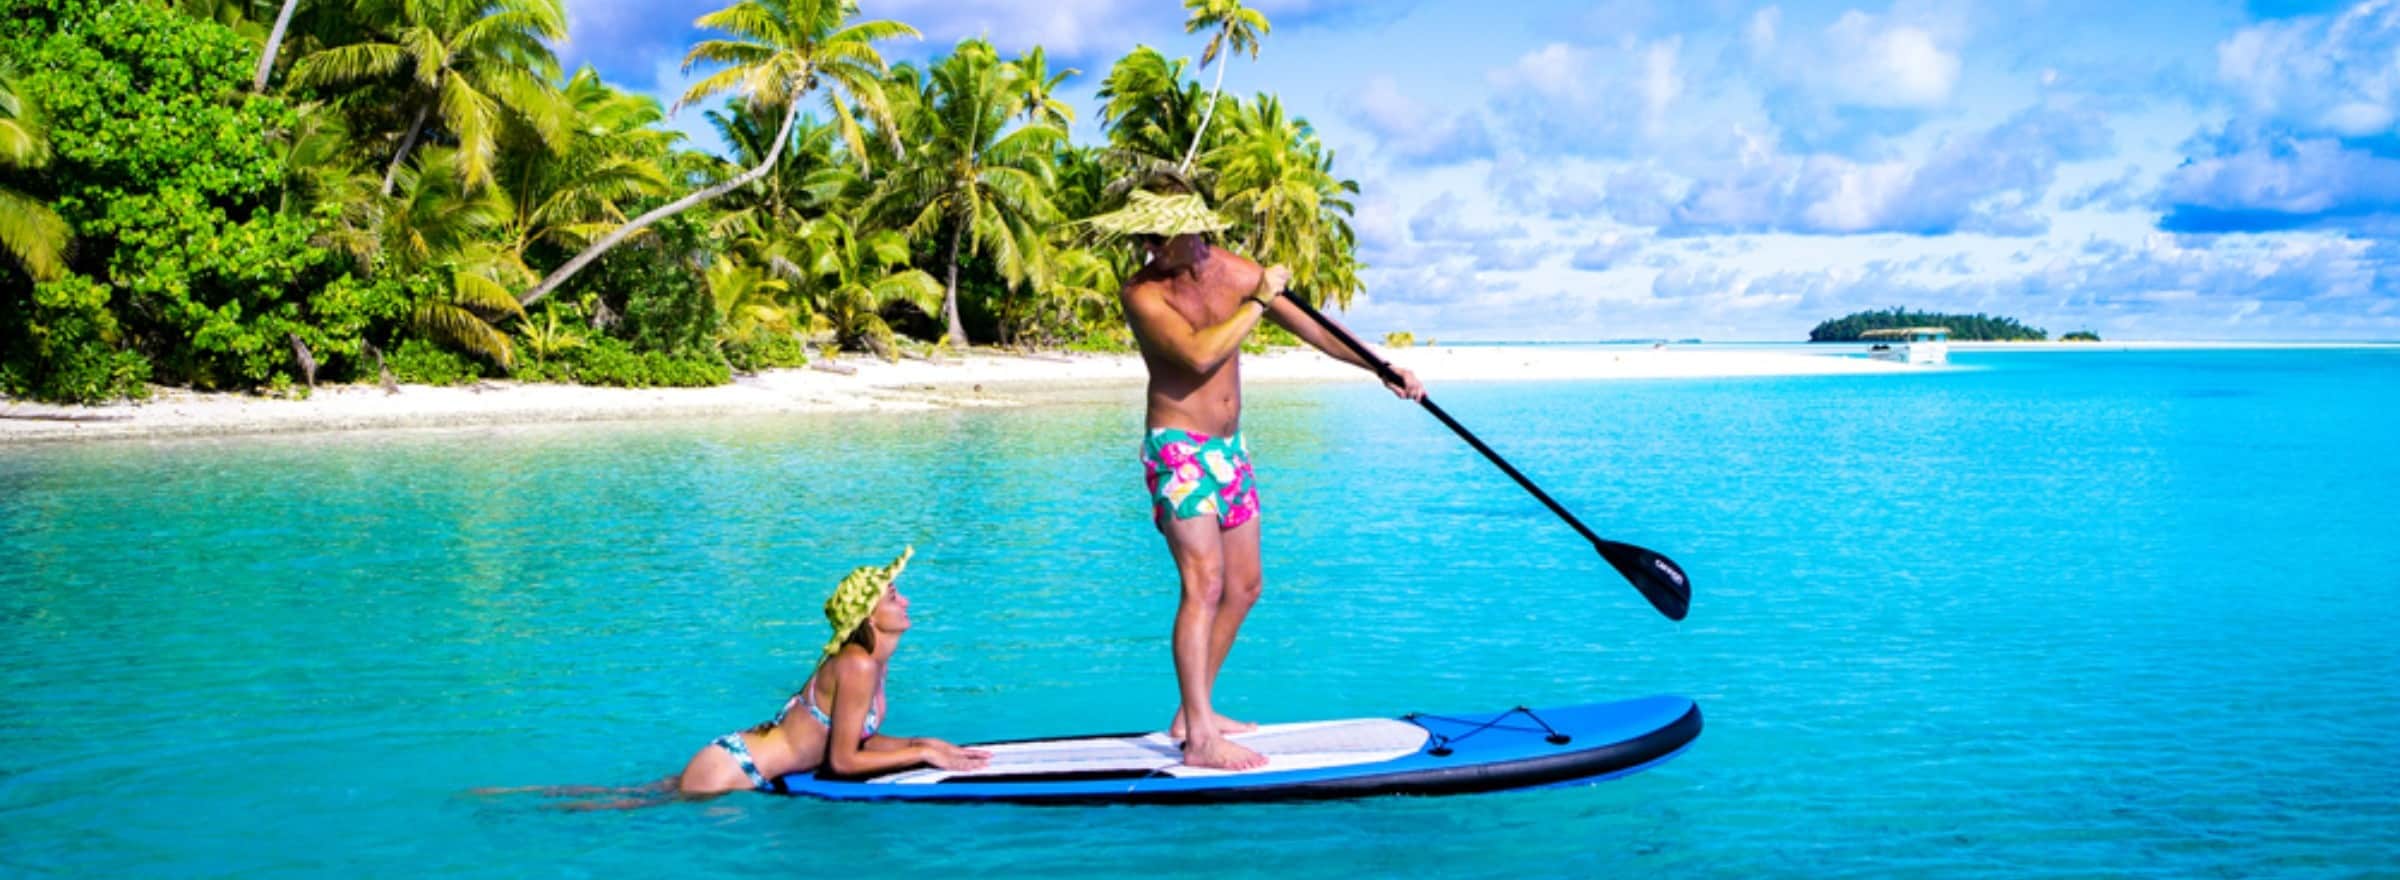 Things You Didn’t Know About the Cook Islands